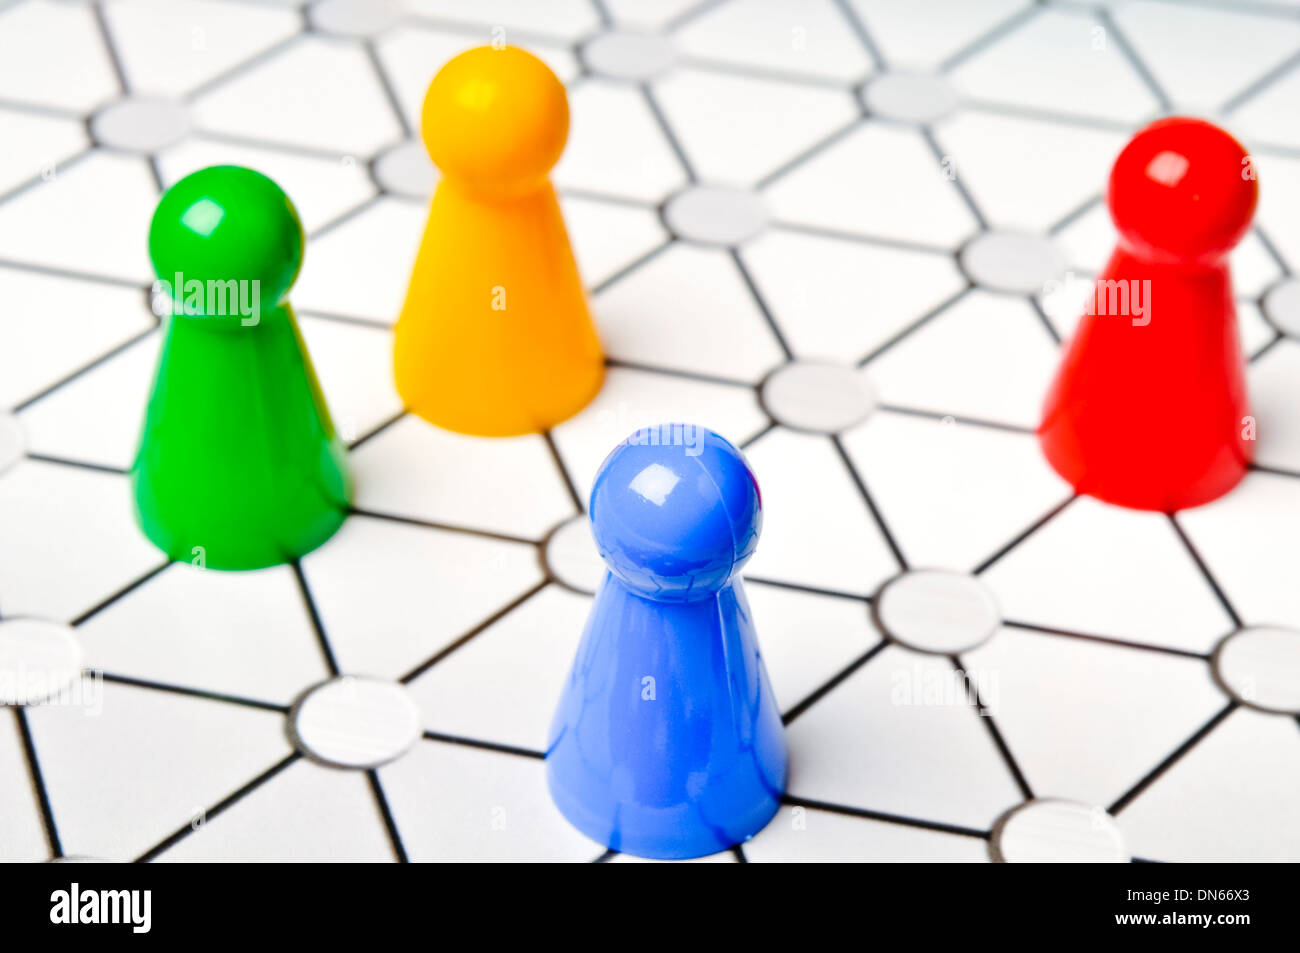 colorful tokens or game-pieces Stock Photo